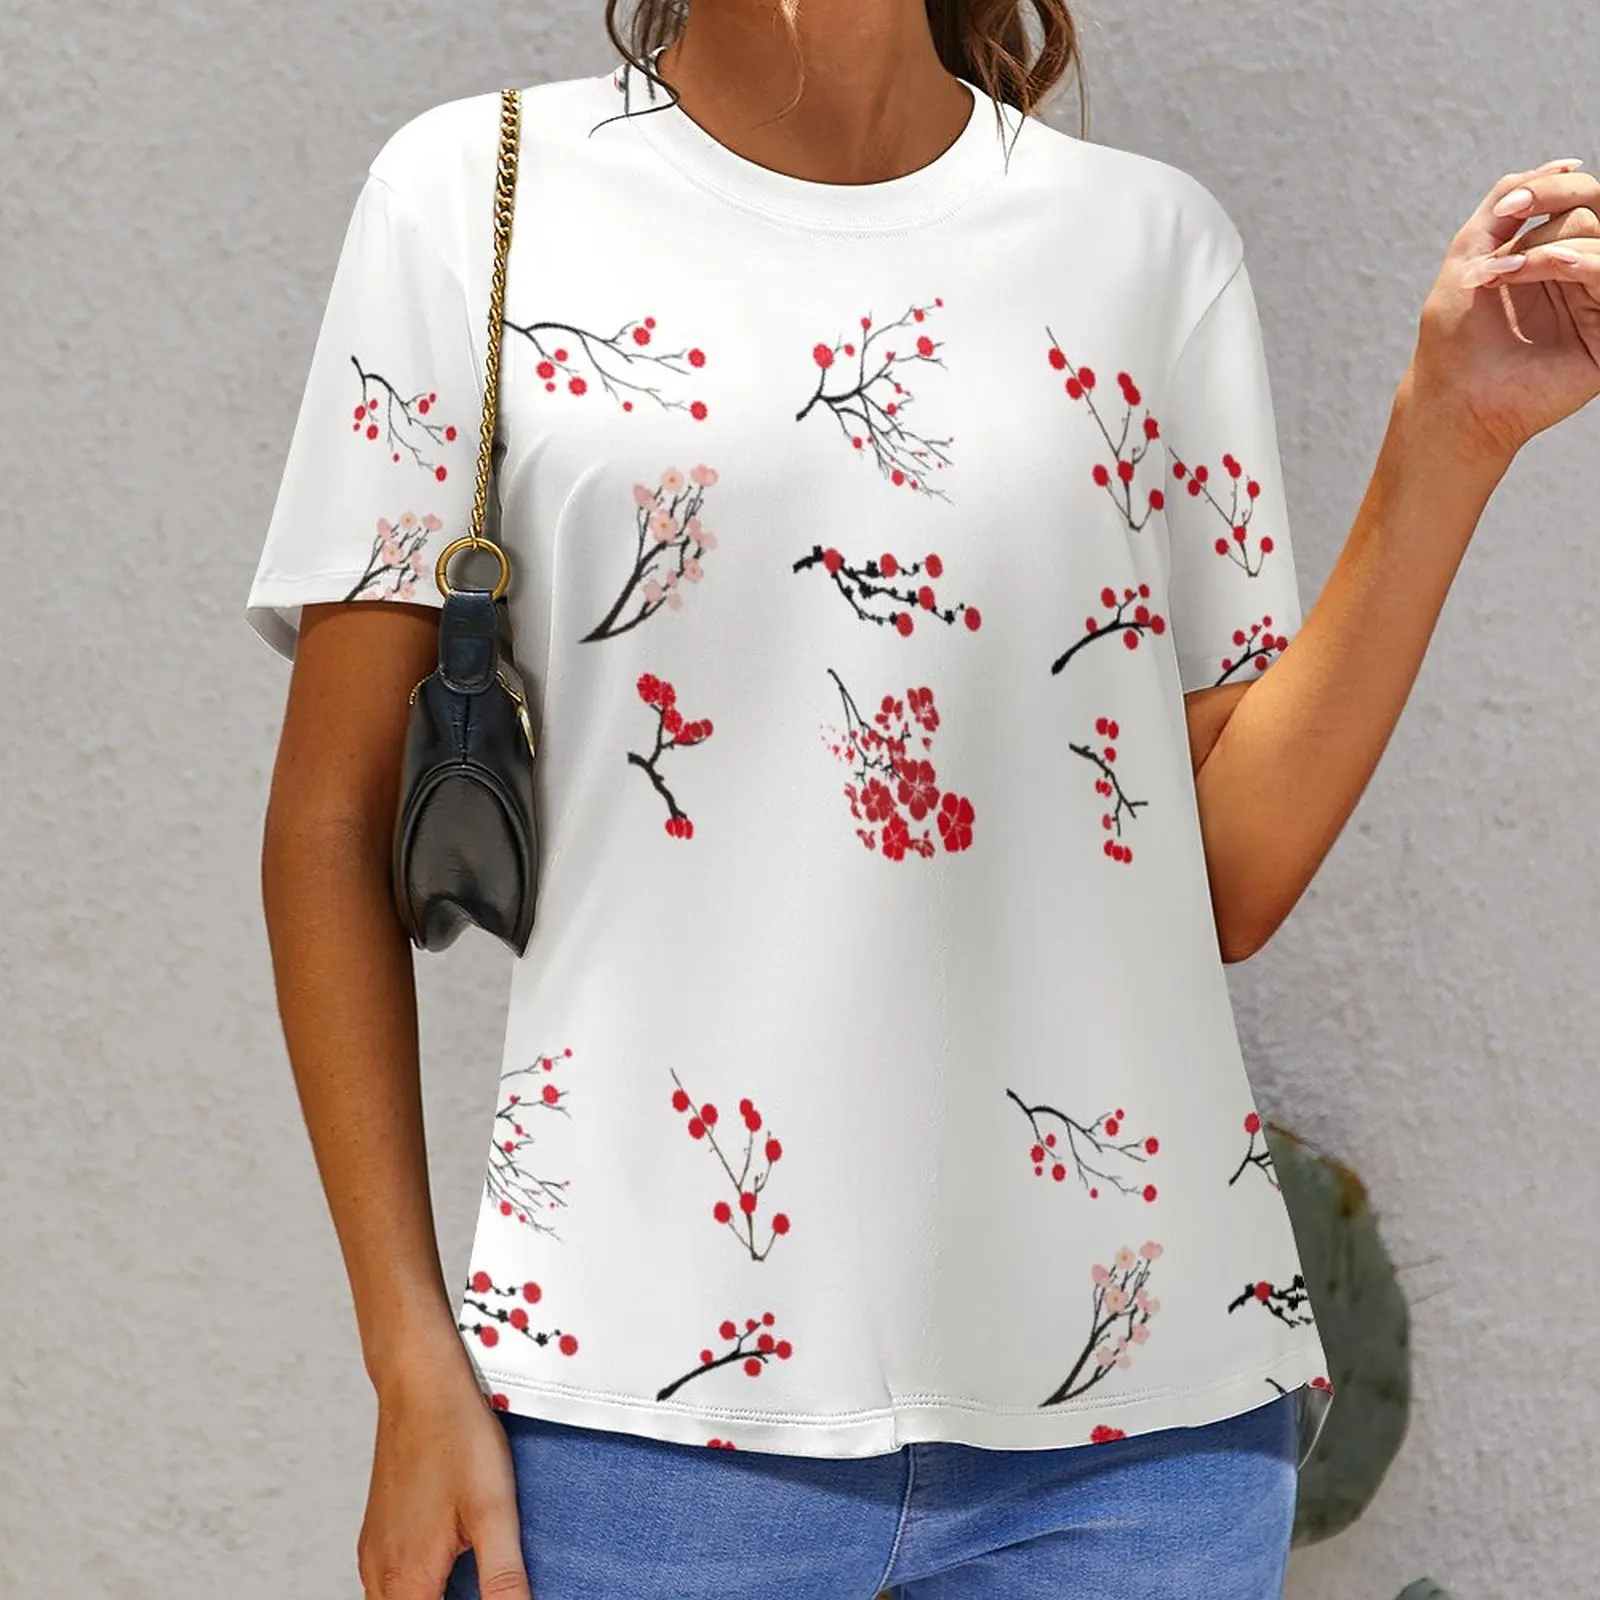 

Tshirt Koi Carp Fish Couple Swimming with Cherry Blossom Sakura Branch Culture Graphic Fitness USA Size top Quality